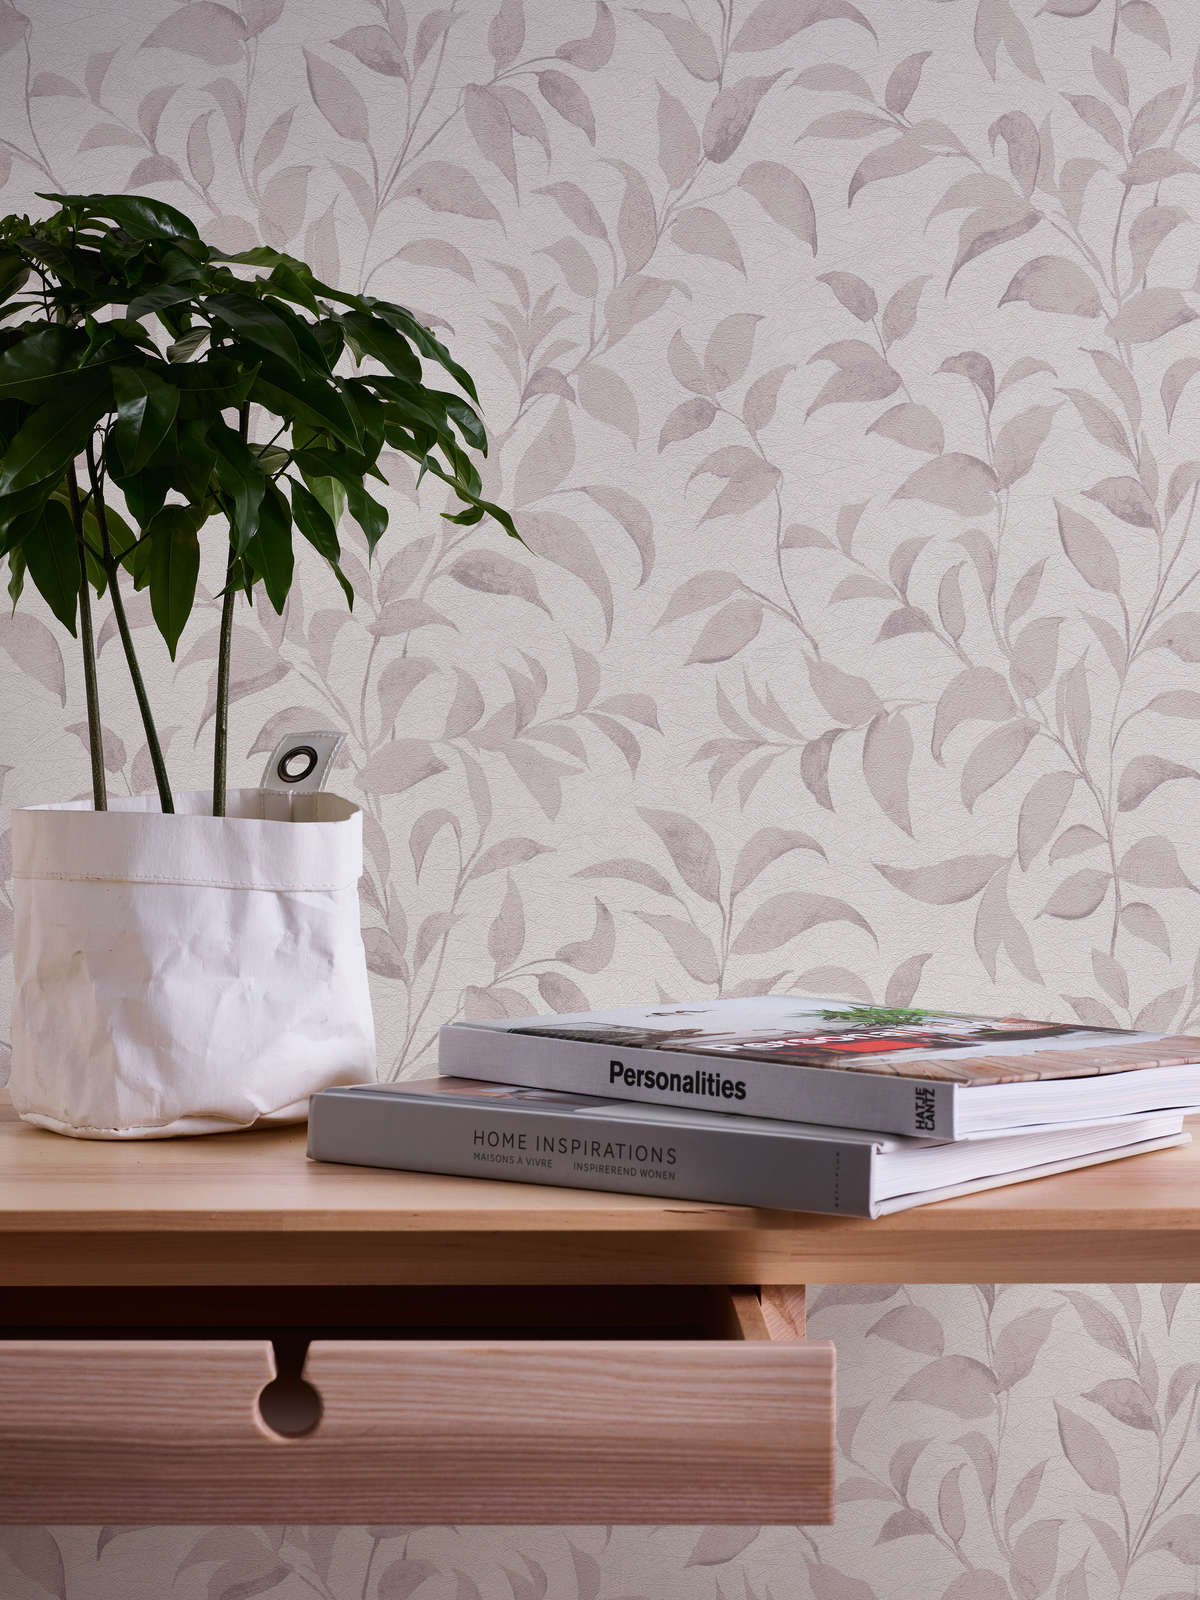             wallpaper floral with leaves shimmer textured - white, beige, grey
        